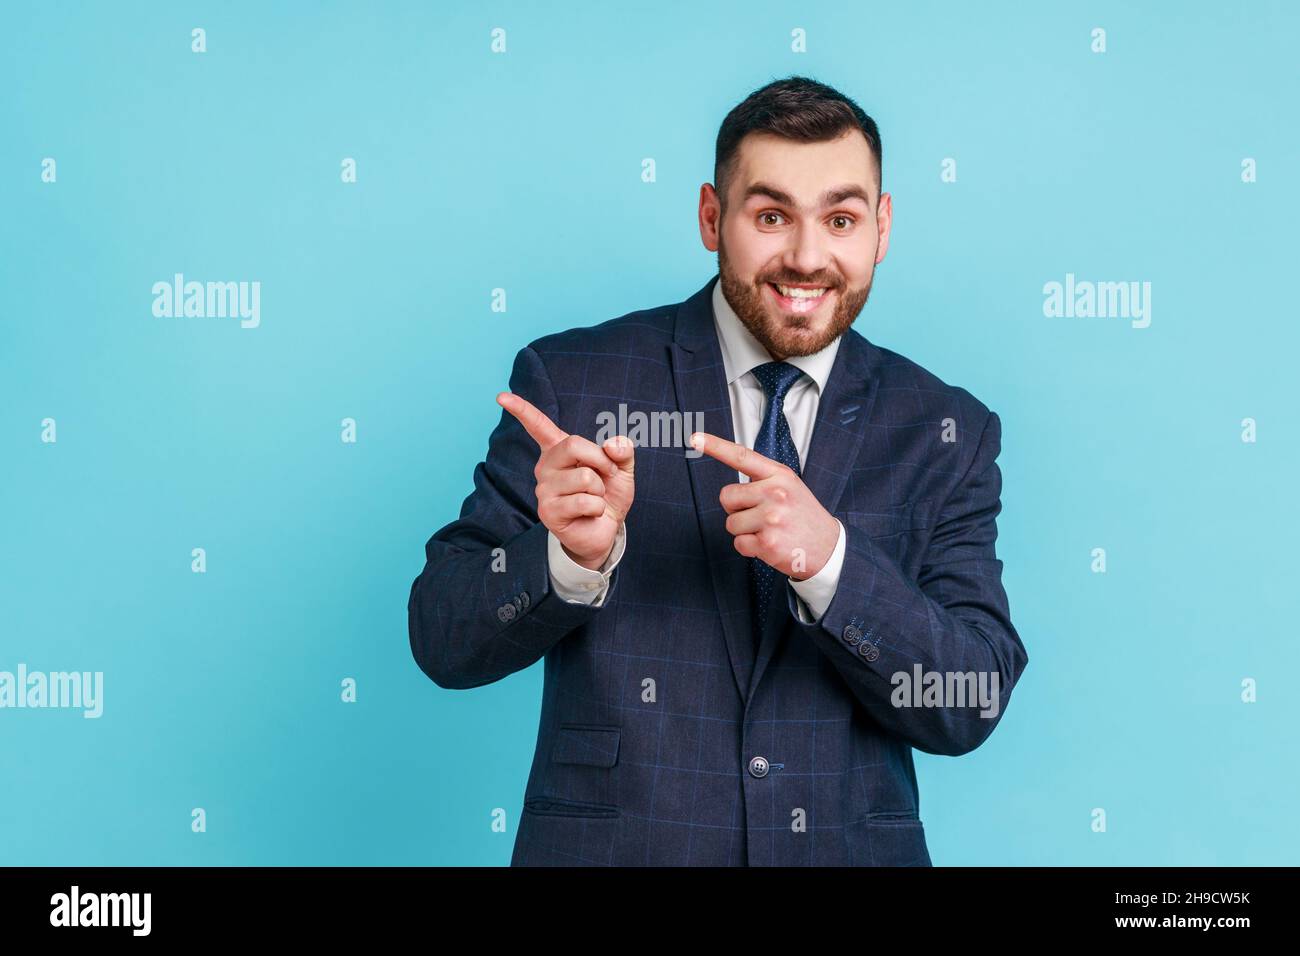 Look At Me. Positive Man Pointing Fingers At Himself Standing On White  Background. Studio Shot Stock Photo, Picture and Royalty Free Image. Image  135297842.